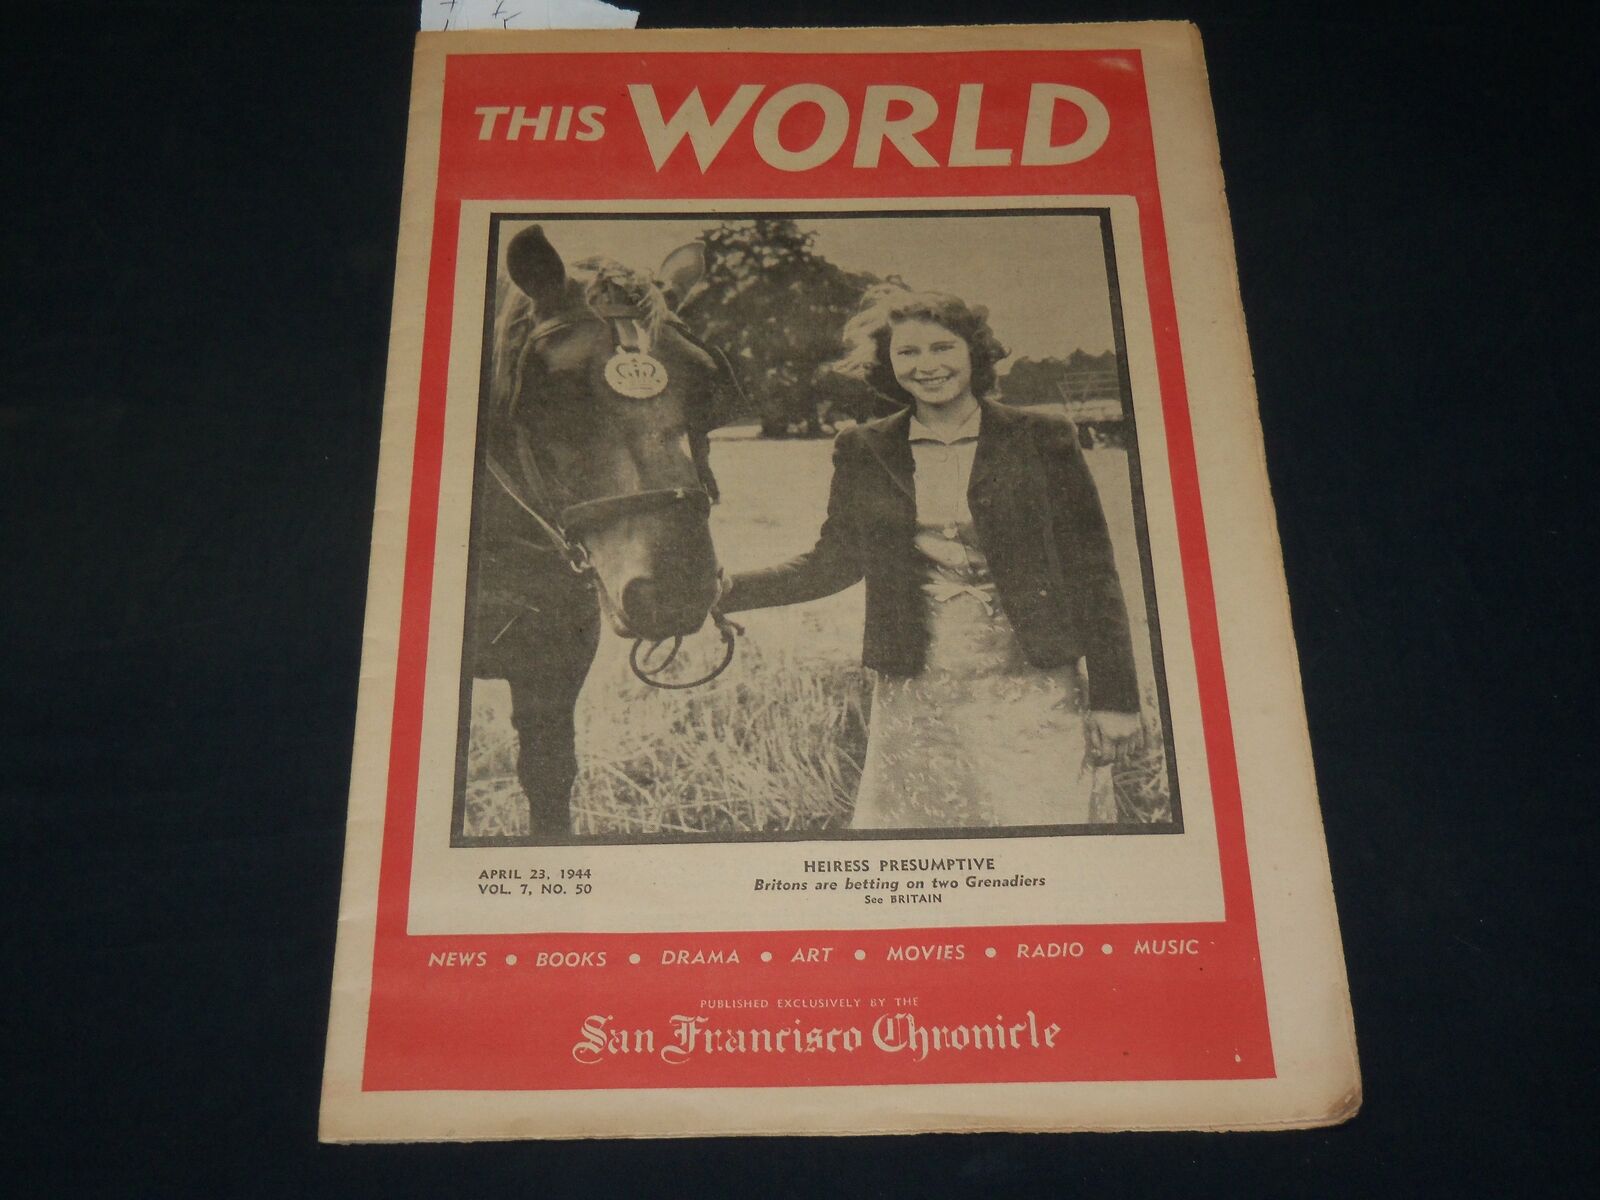 1944 APRIL 23 SF CHRONICLE THIS WORLD SECTION - PRINCESS ELIZABETH - NP 2399A